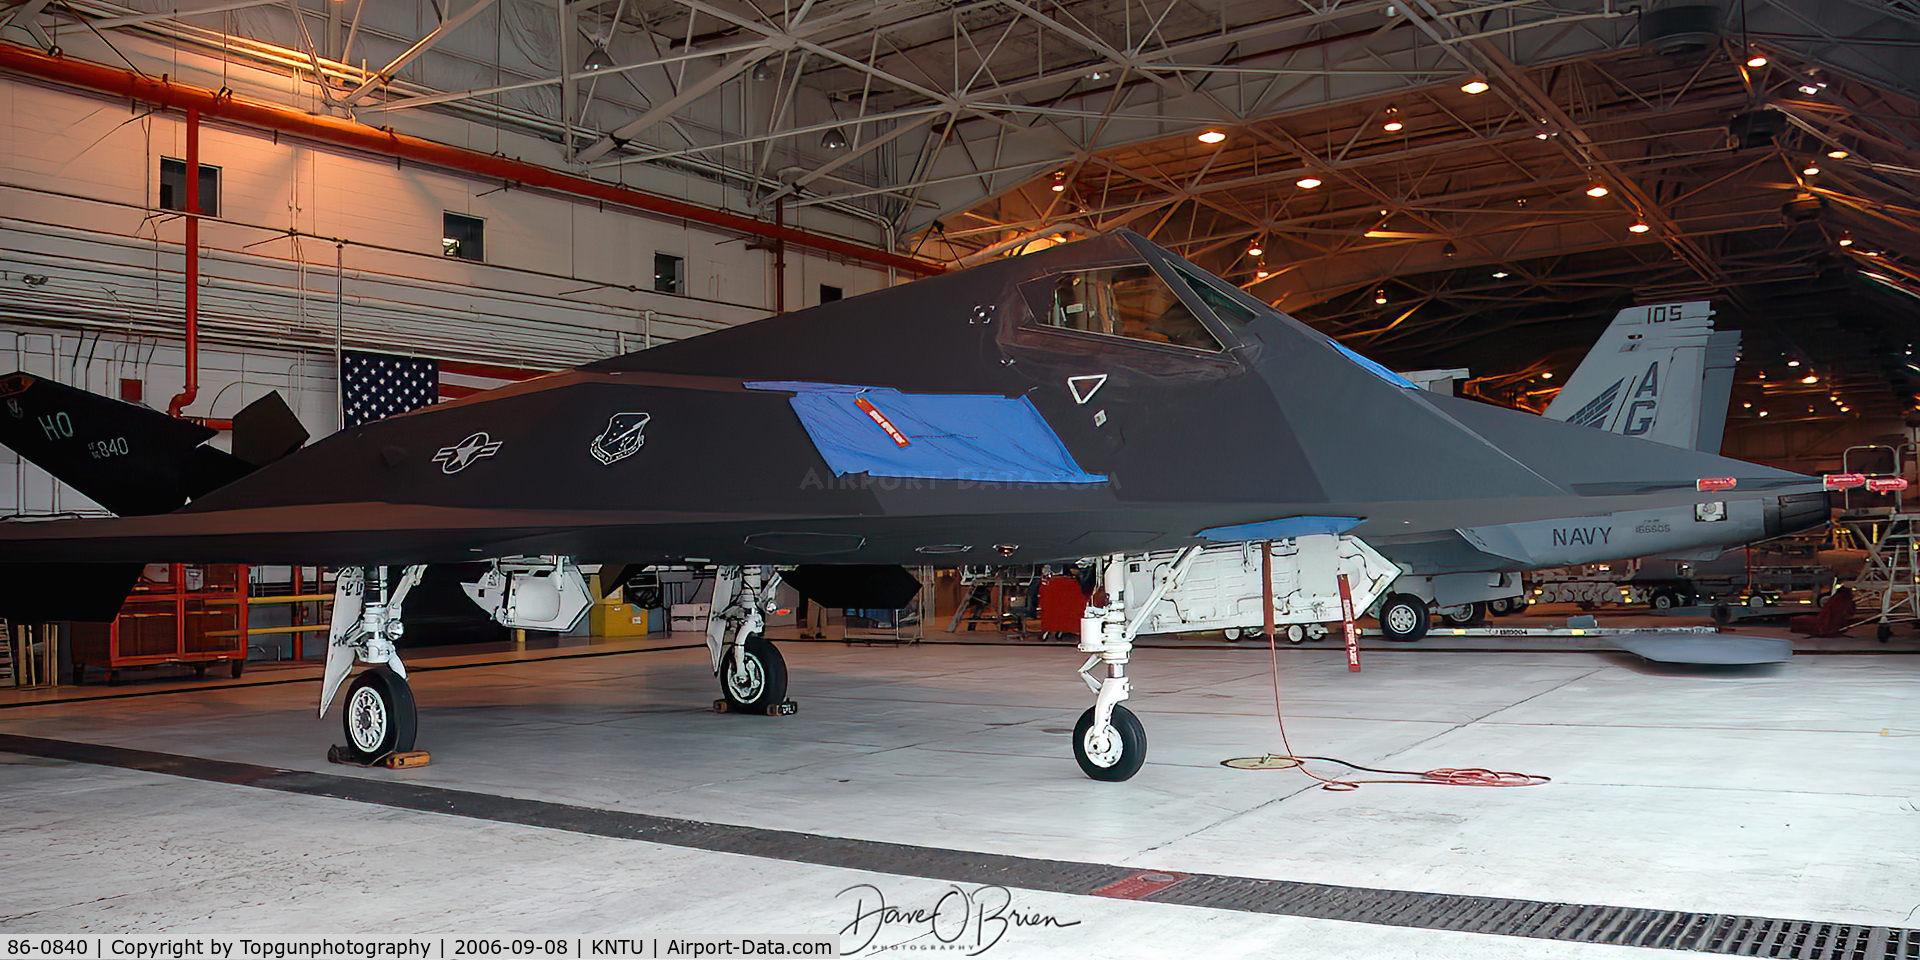 86-0840, 1986 Lockheed F-117A Nighthawk C/N A.4065, F-117 put away in a hanger prior to the show. Used for the Demo